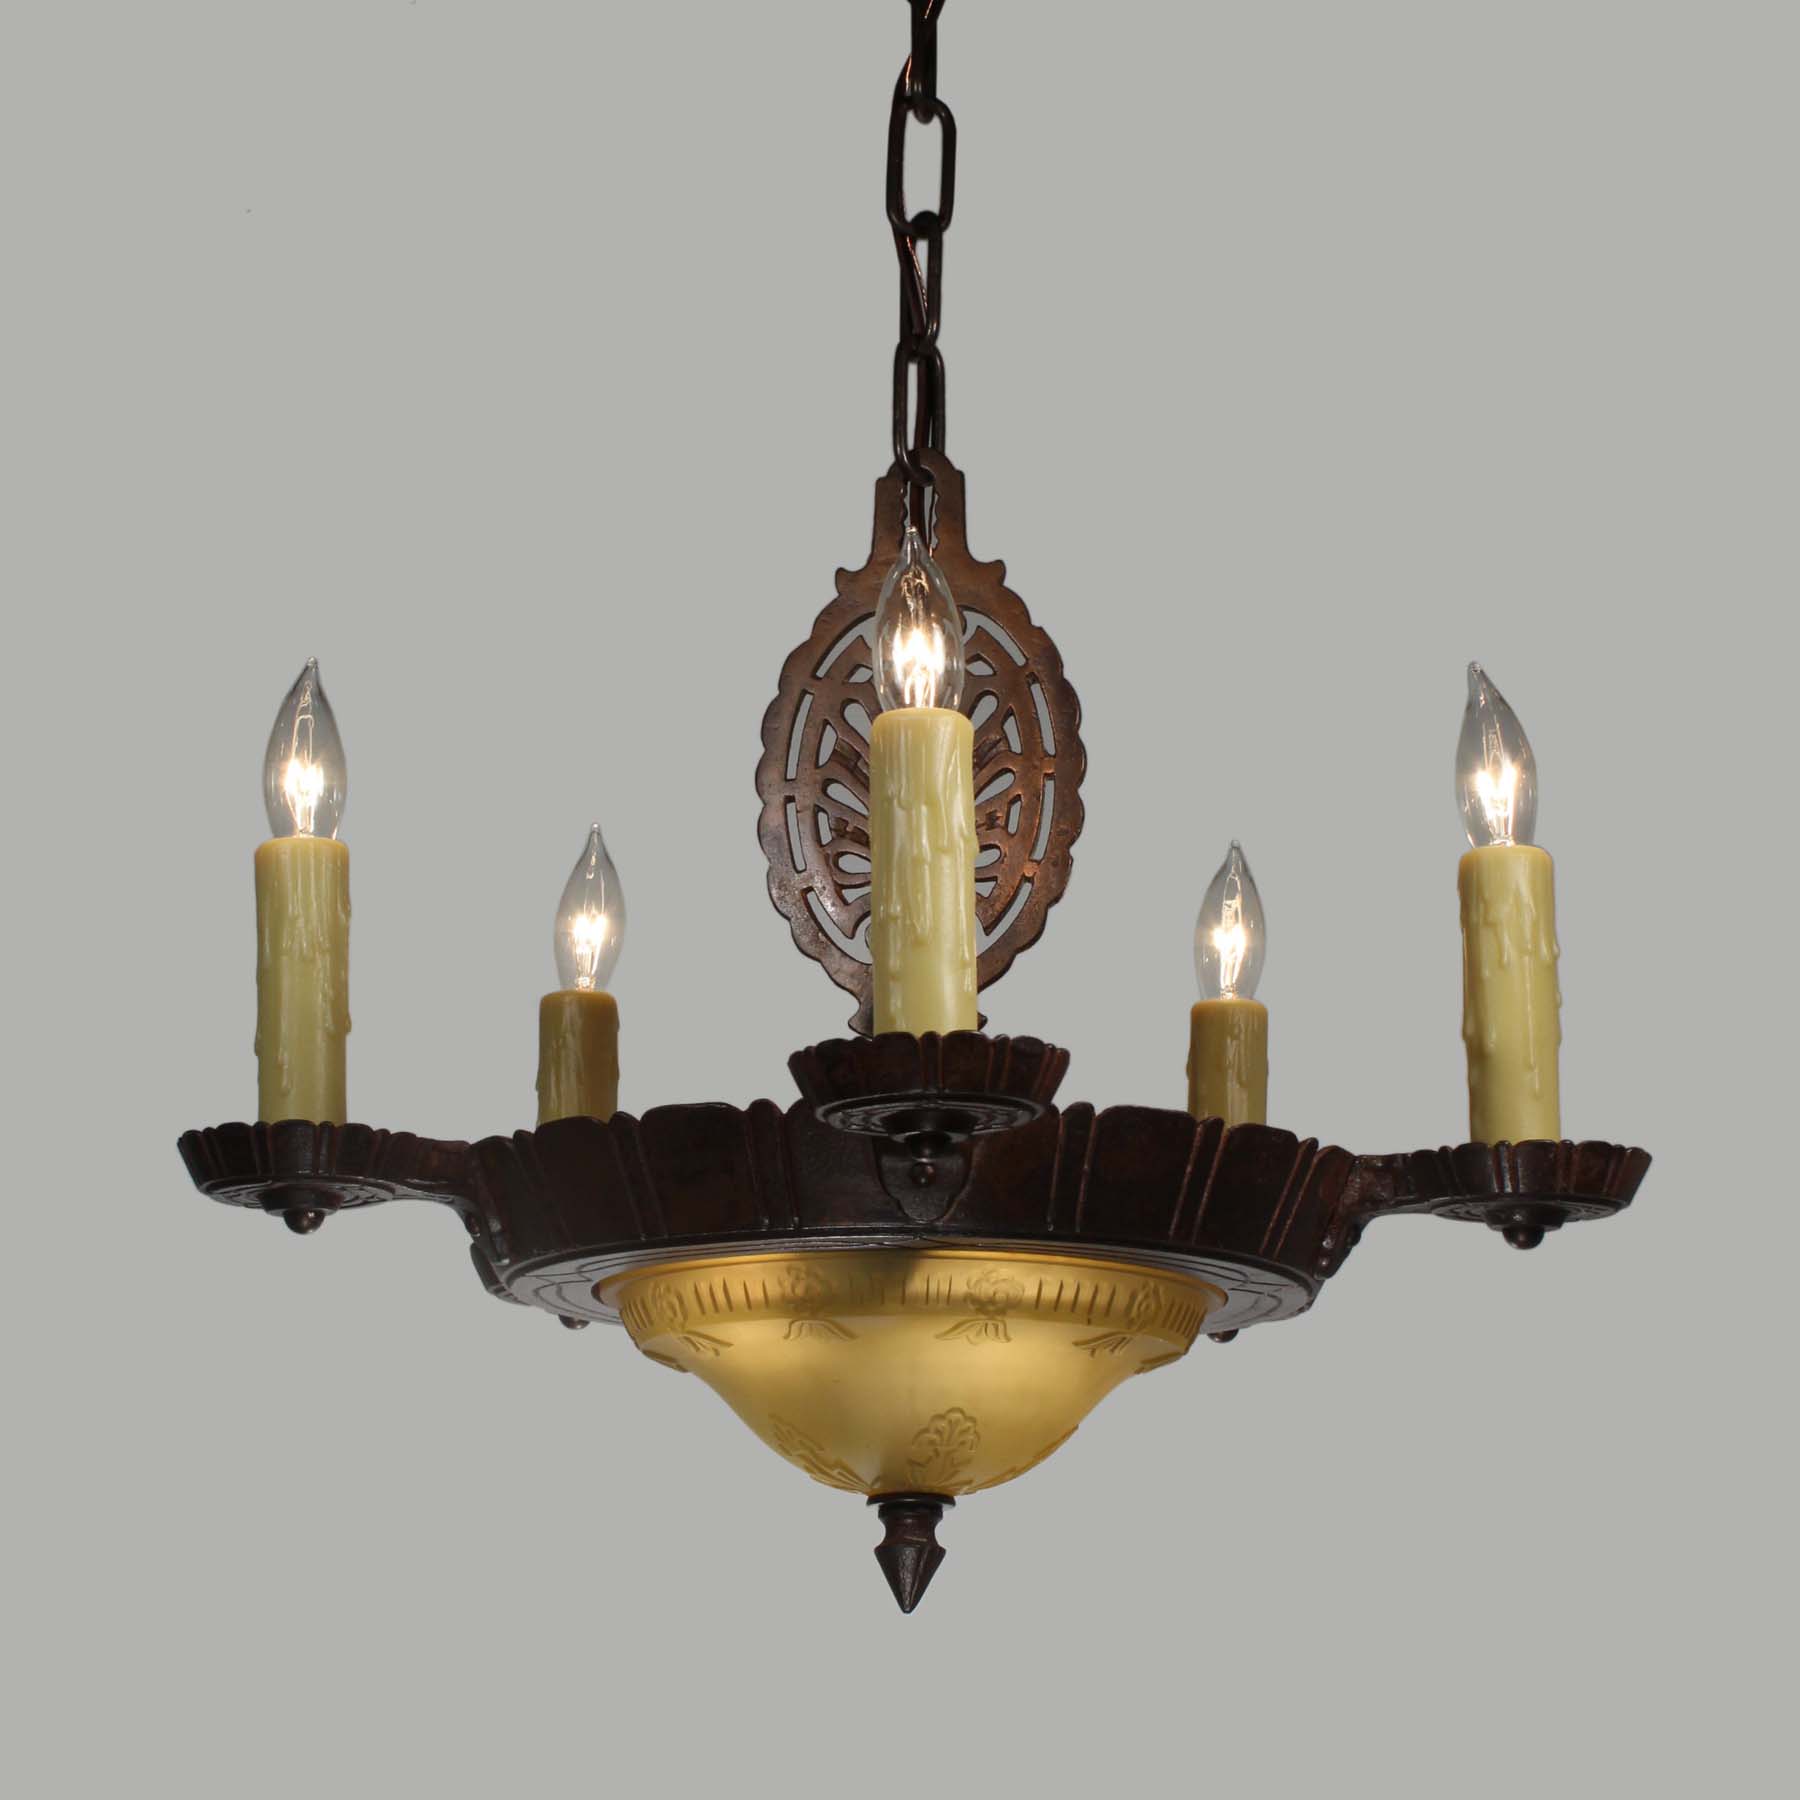 SOLD Antique Cast Iron Chandelier with Glass Shade-69937